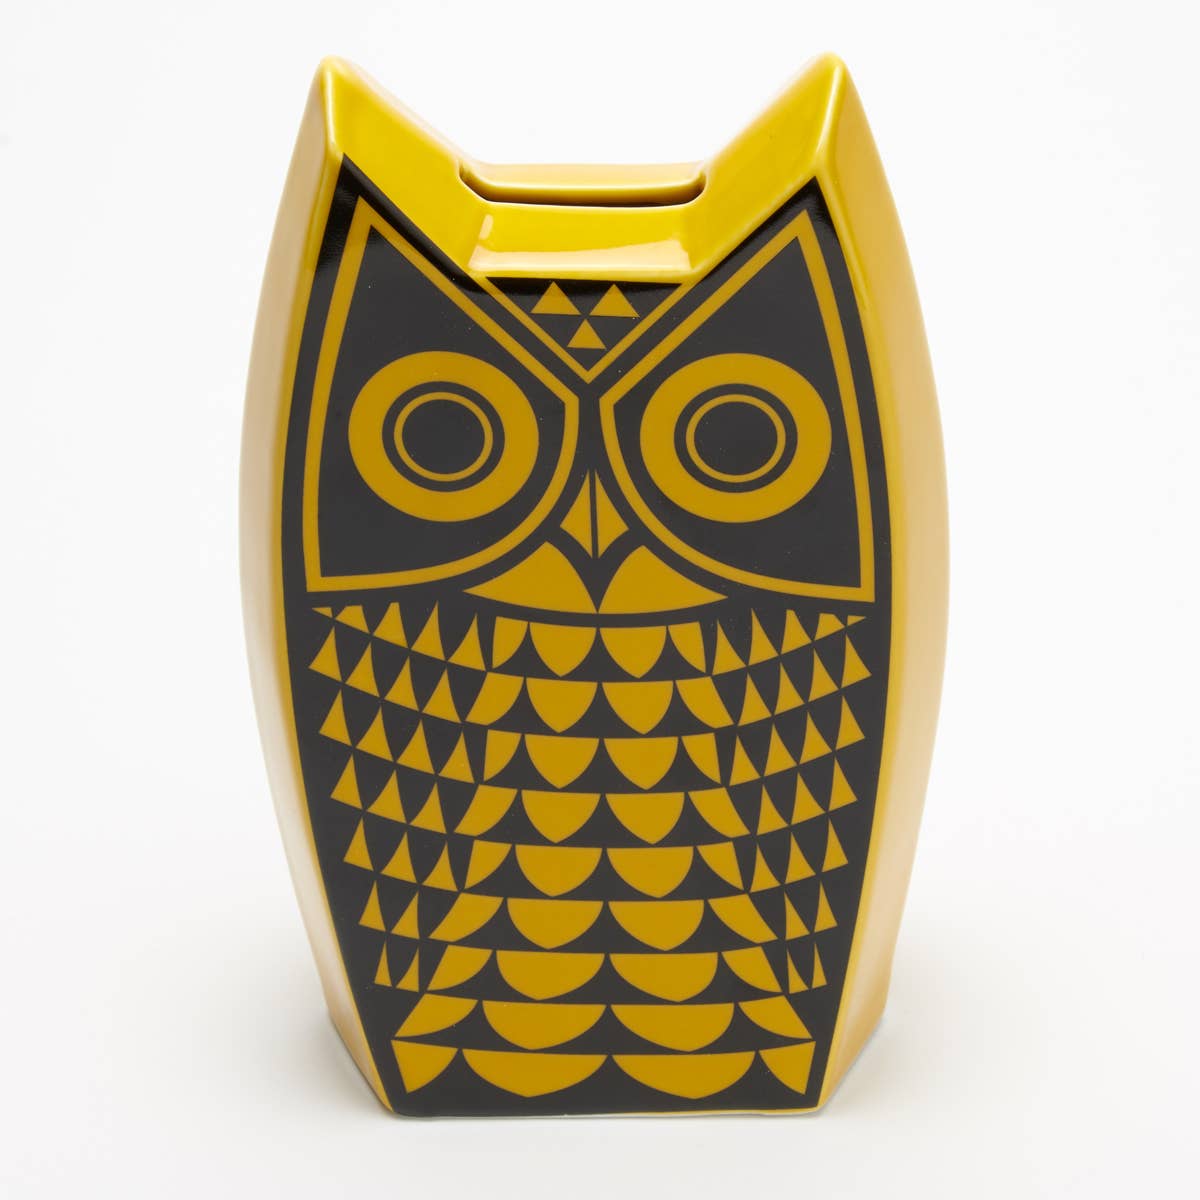 Owl Moneybox in Yellow by Magpie x Hornsea